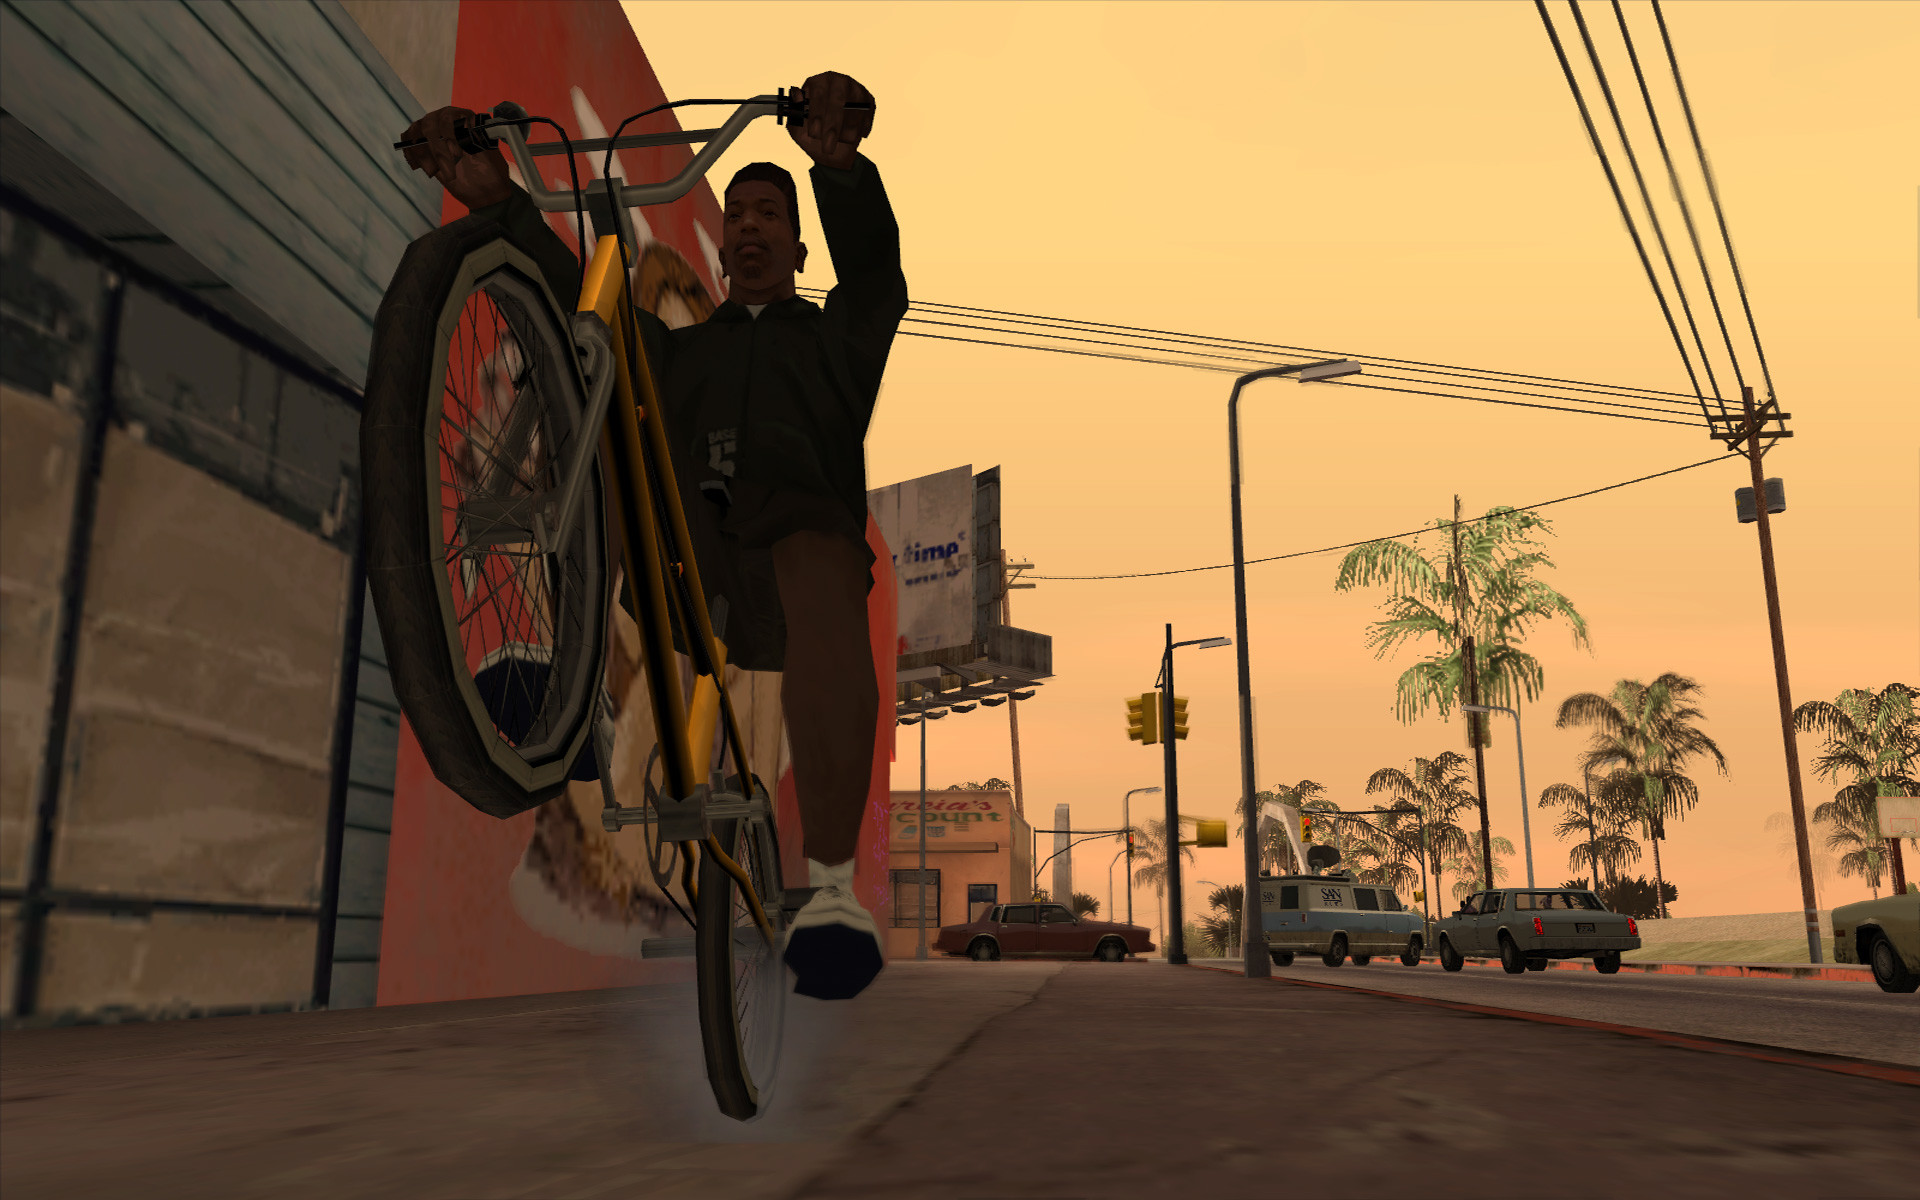 GTA San Andreas Game Free Download Full Version For Pc 